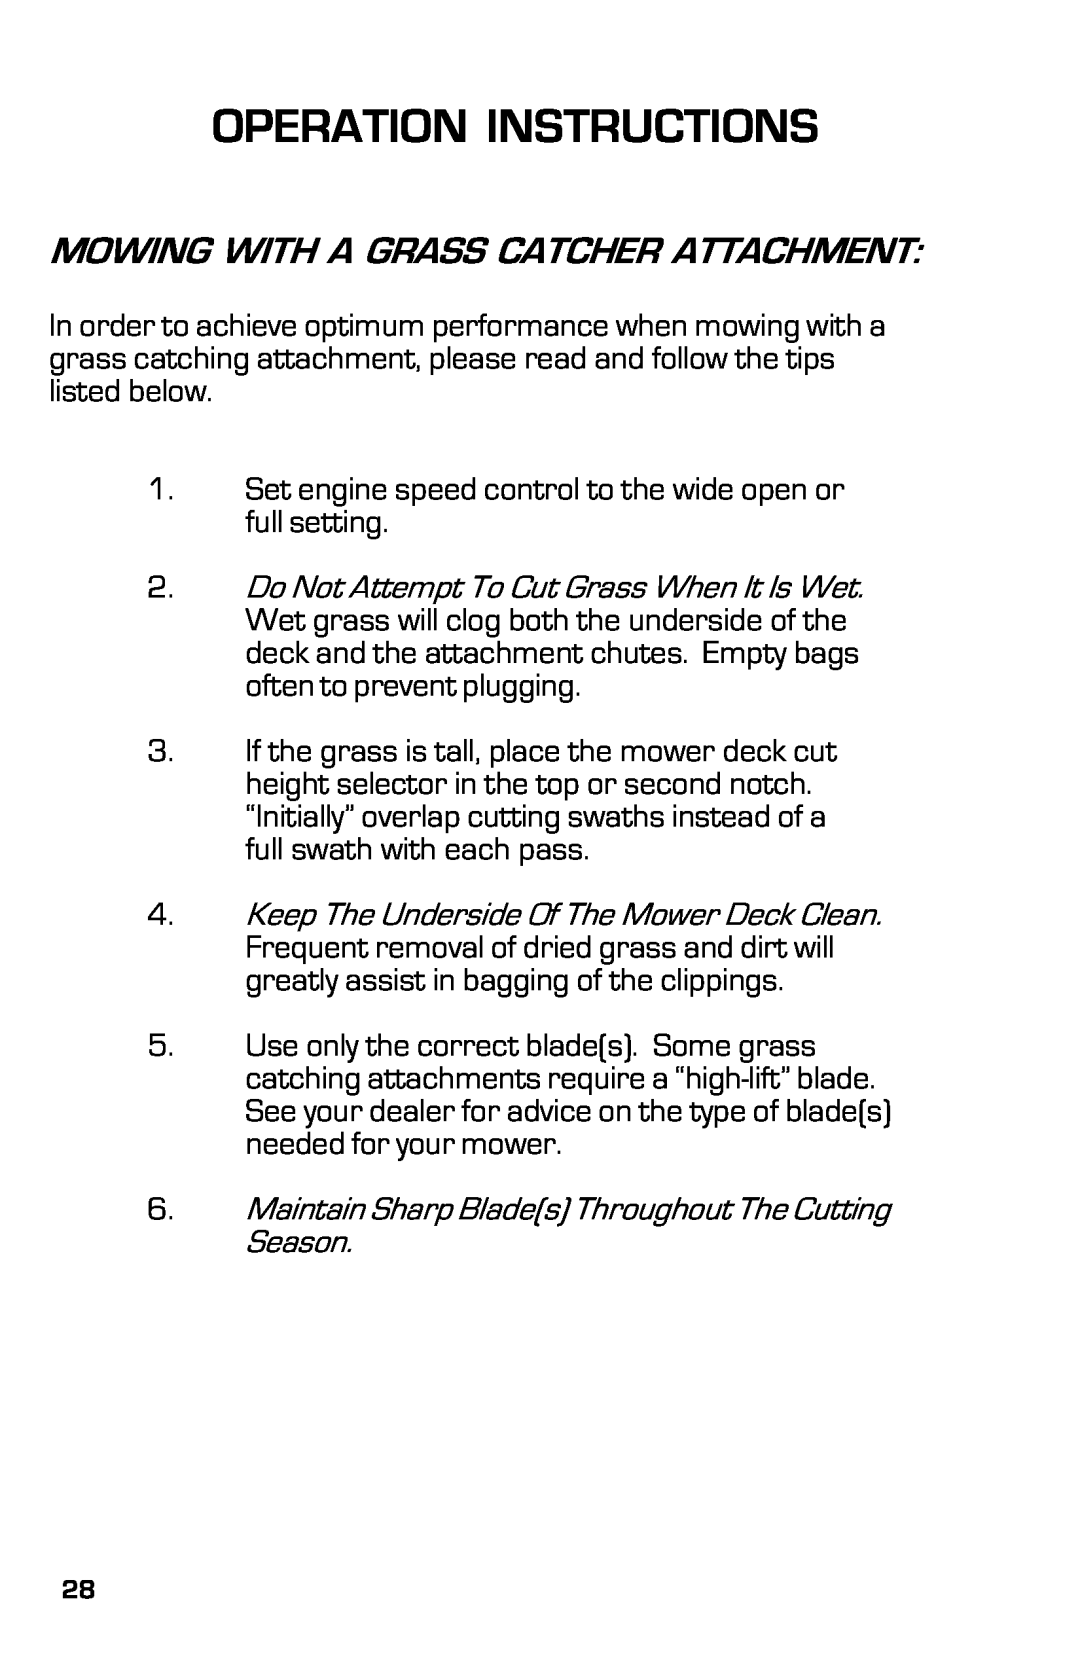 Dixon ZTR 3363, 13631-0702 manual Operation Instructions, Mowing With A Grass Catcher Attachment 